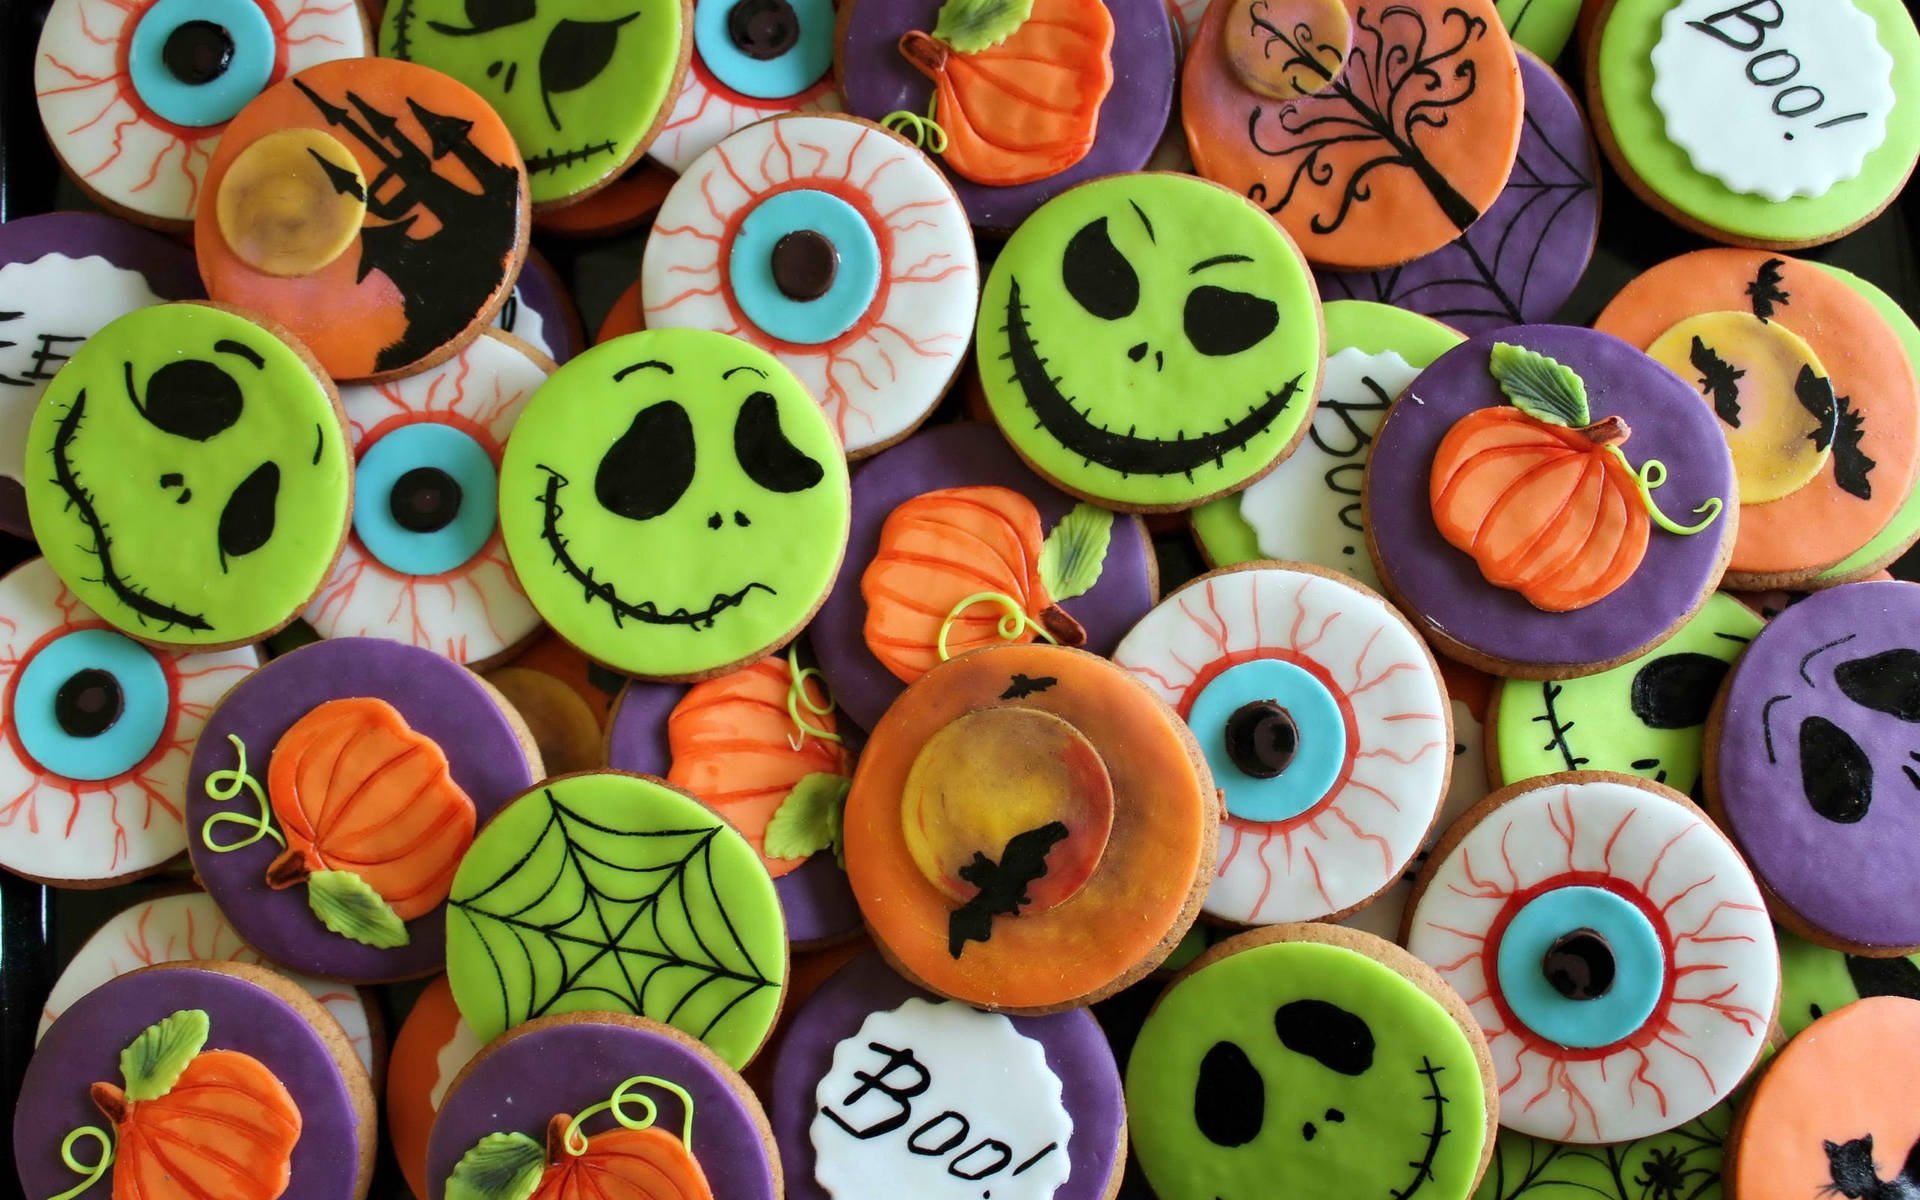 'Cookies For a Monstrously Sweet Halloween!' Wallpaper